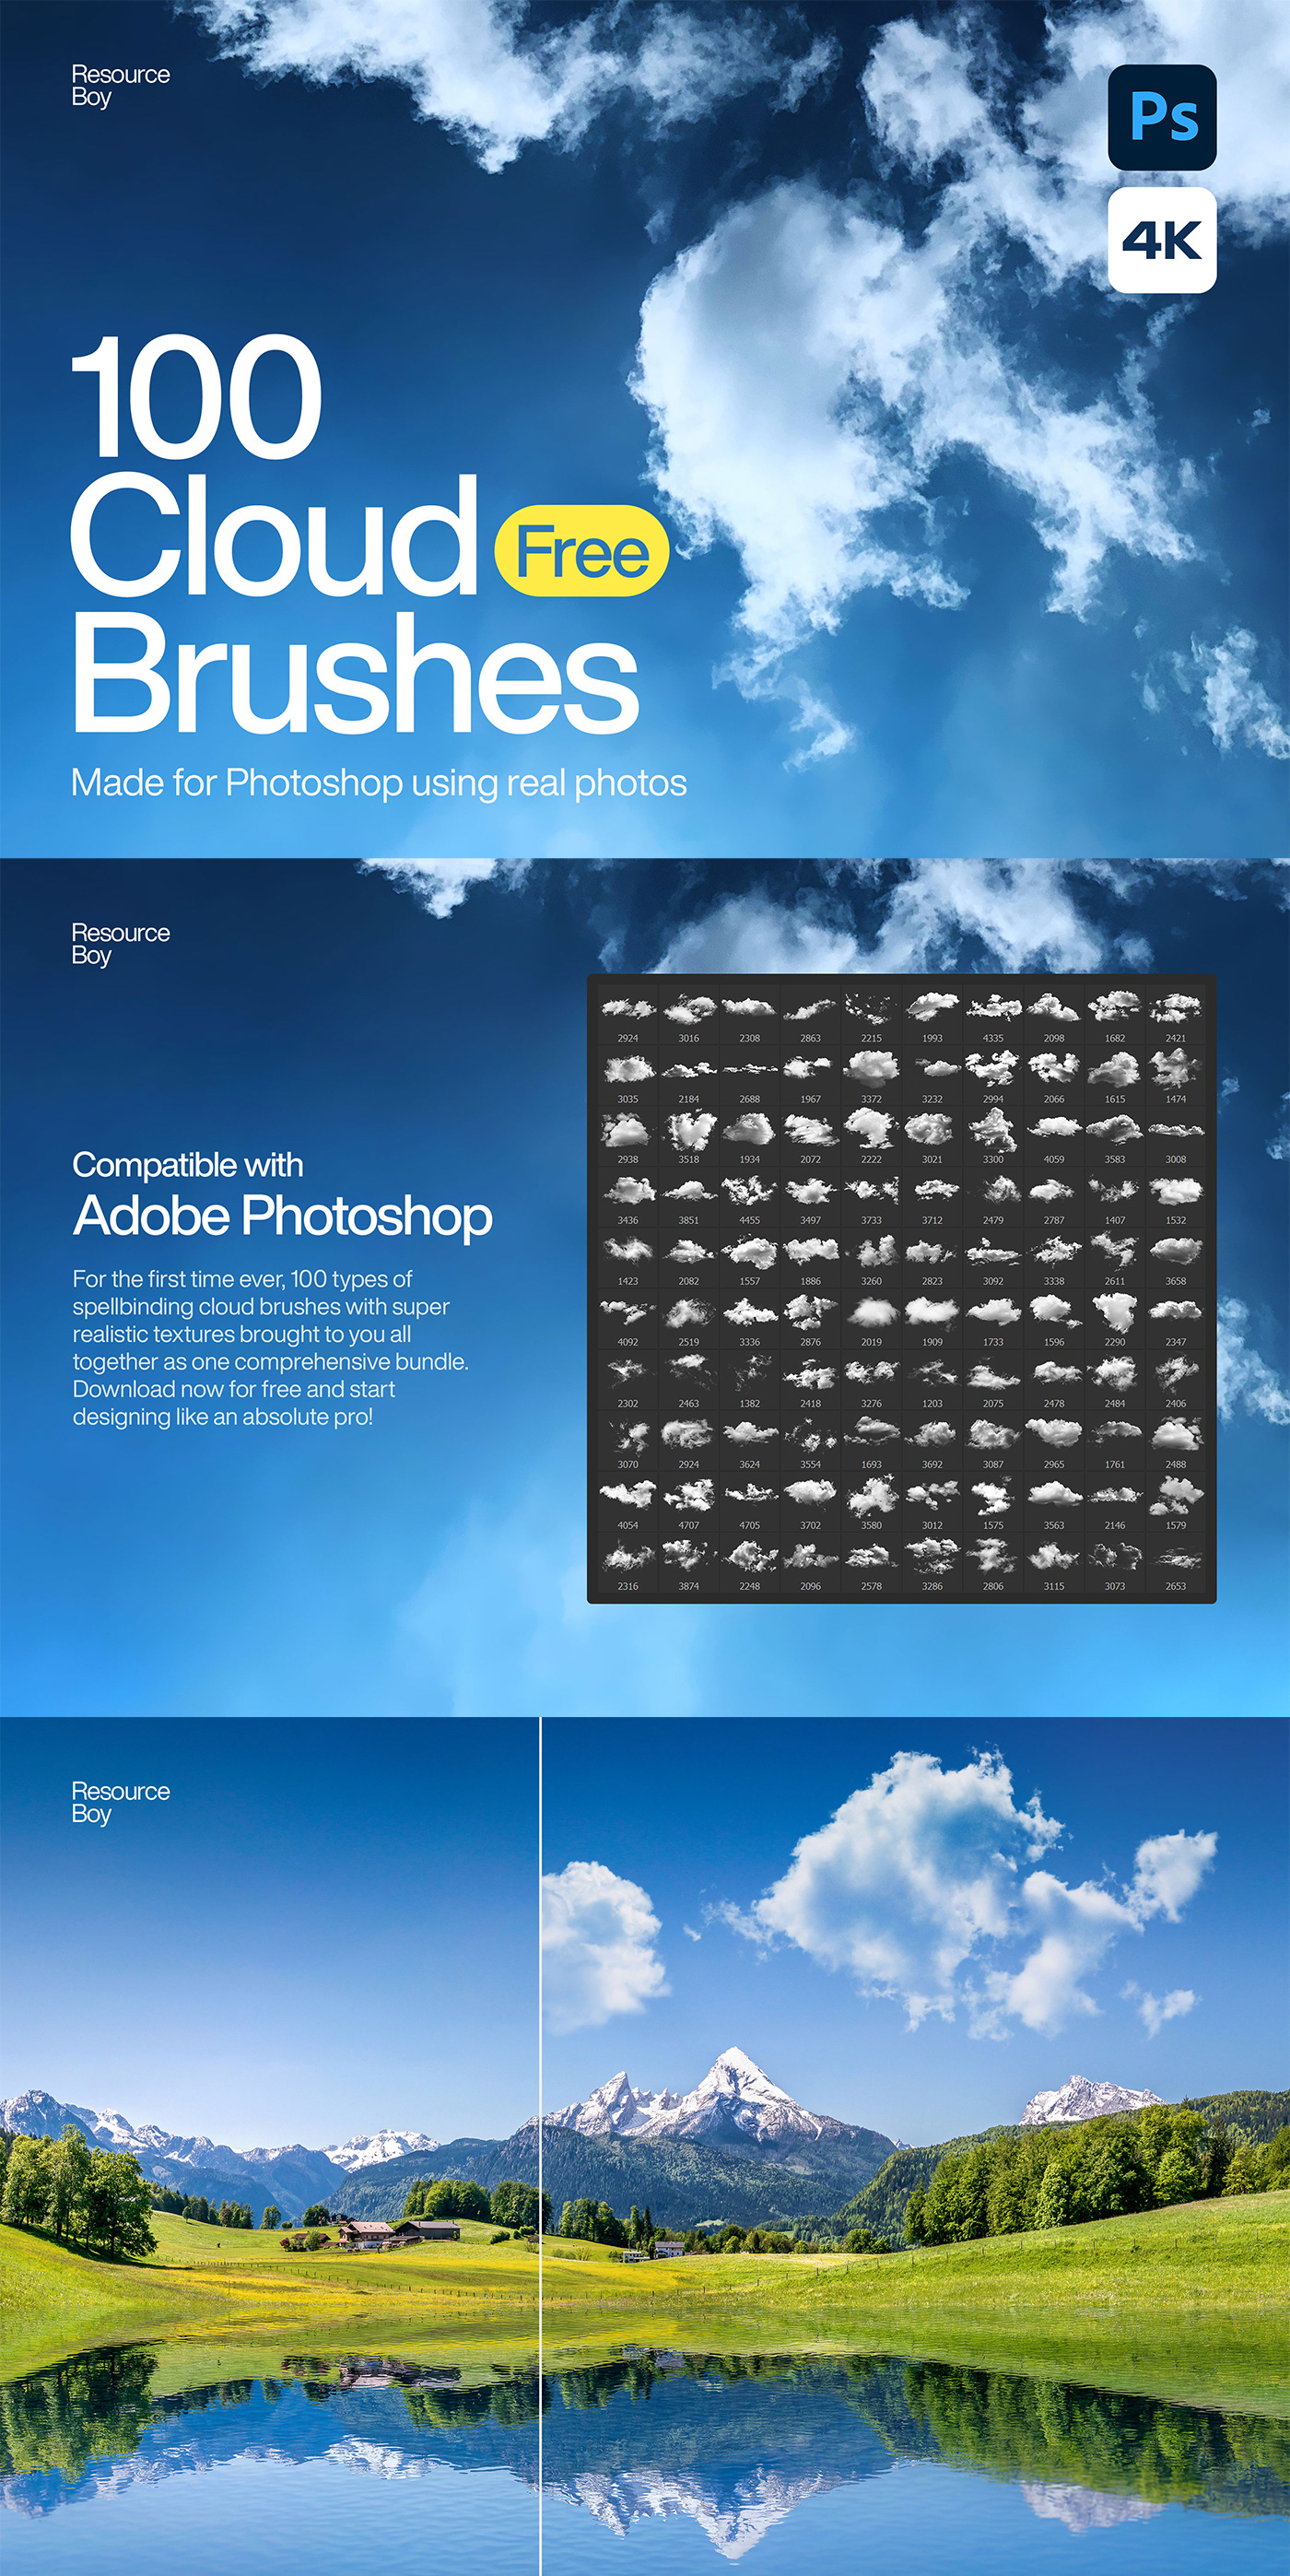 Cloud Photoshop Brushes is here for you; a realistic and dreamy view is in the bag in seconds;